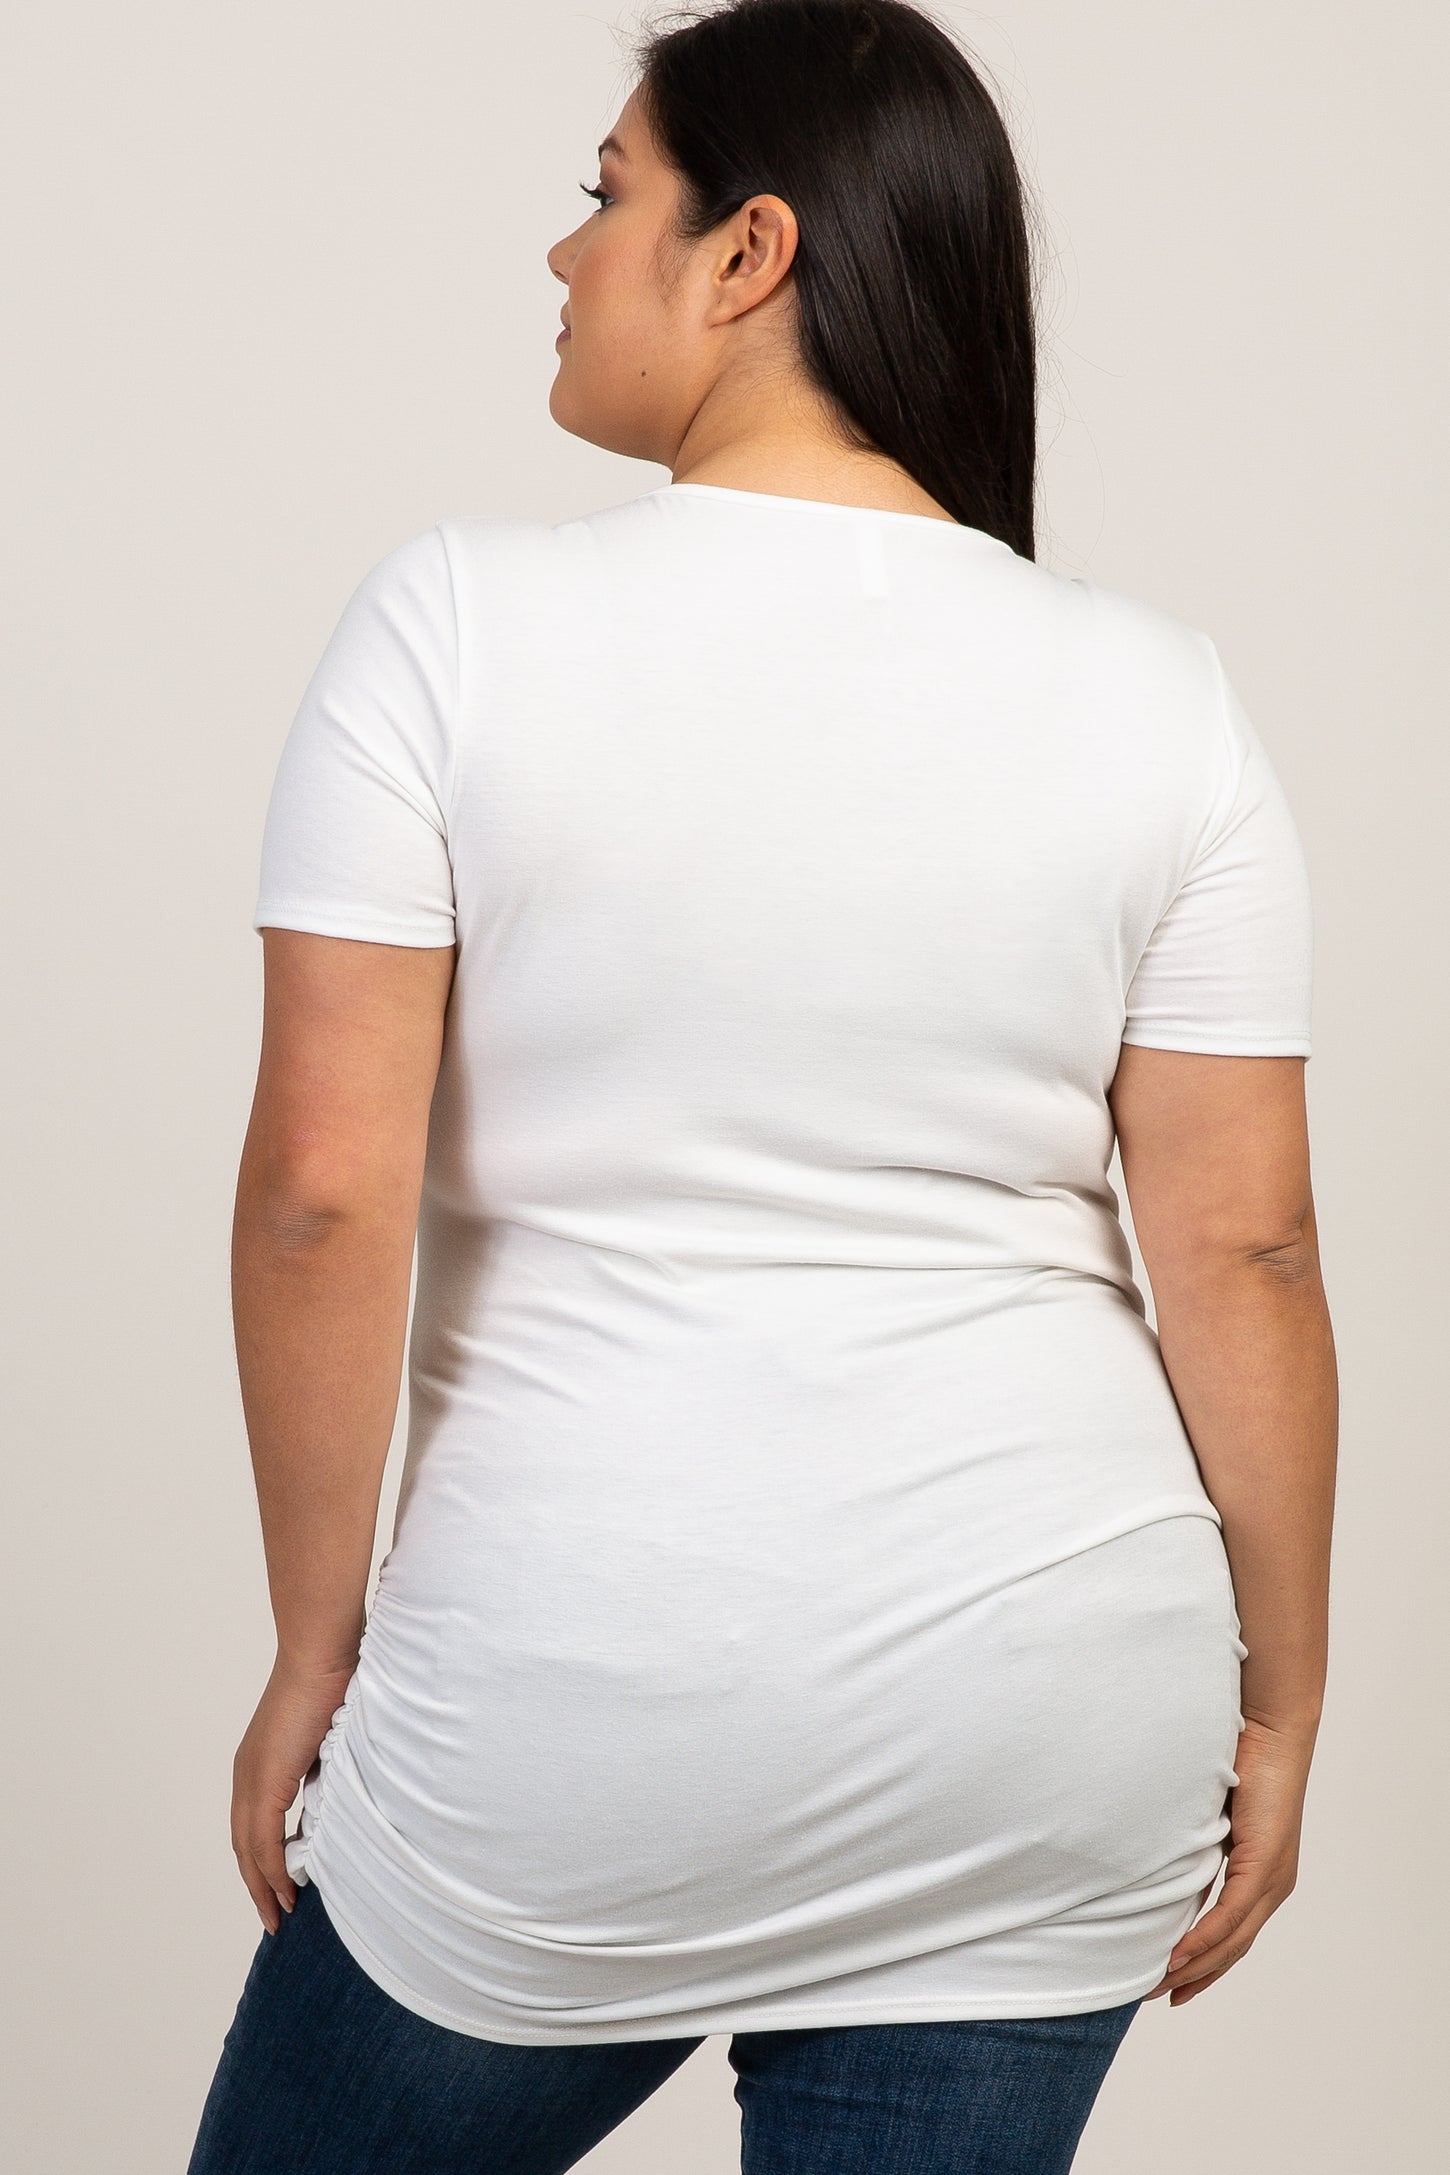 PinkBlush White Basic V-Neck Fitted Plus Maternity Top